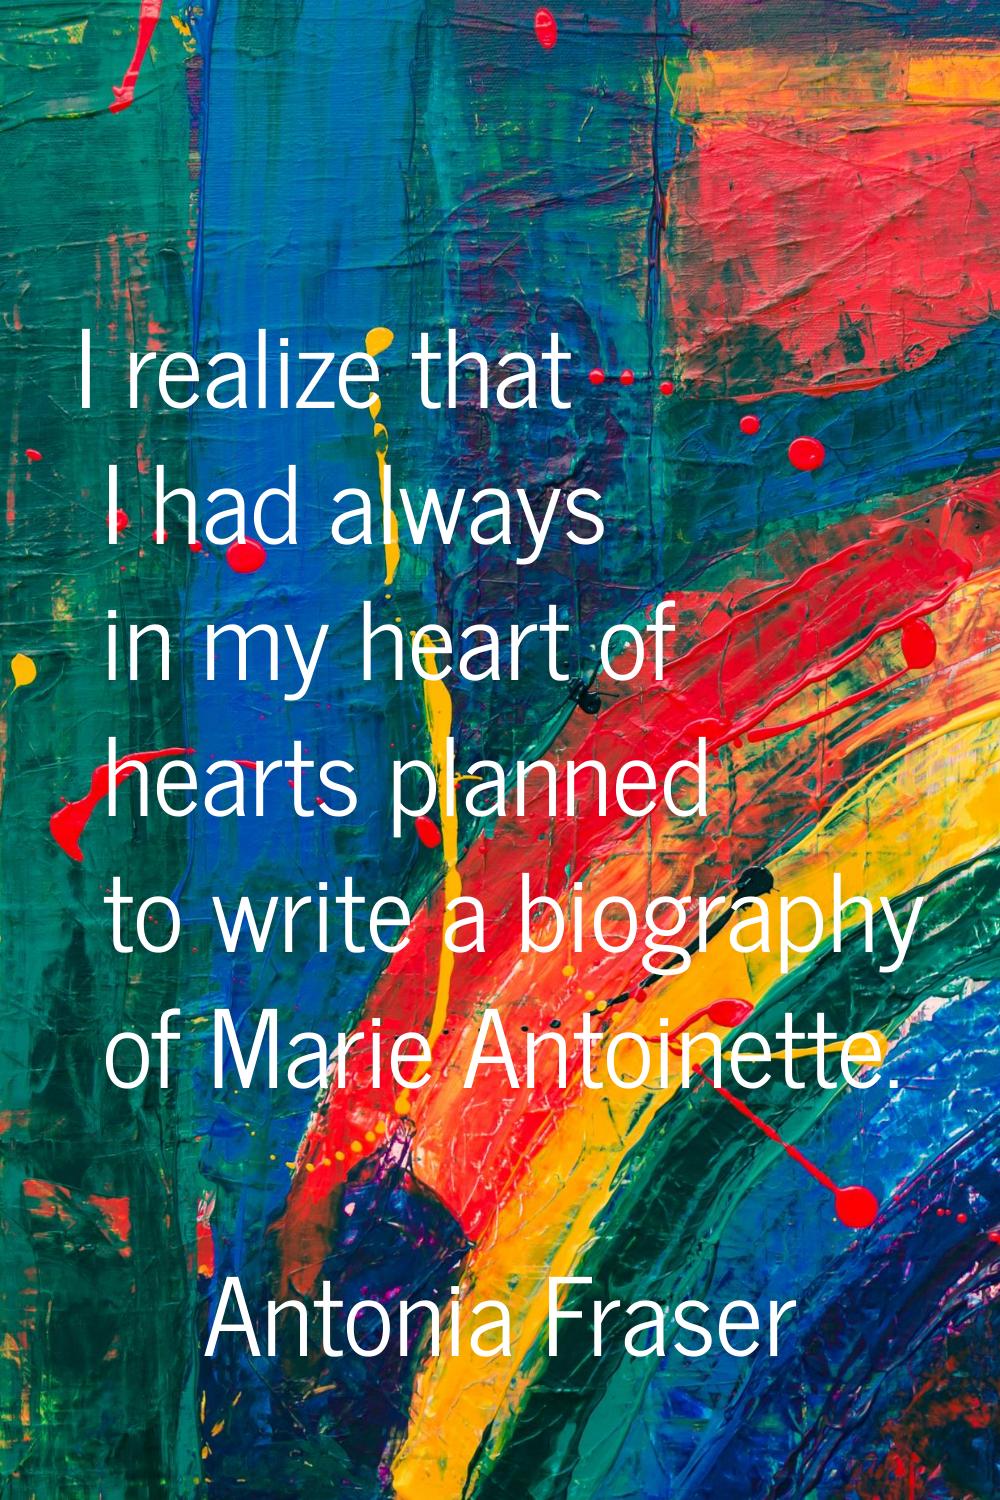 I realize that I had always in my heart of hearts planned to write a biography of Marie Antoinette.